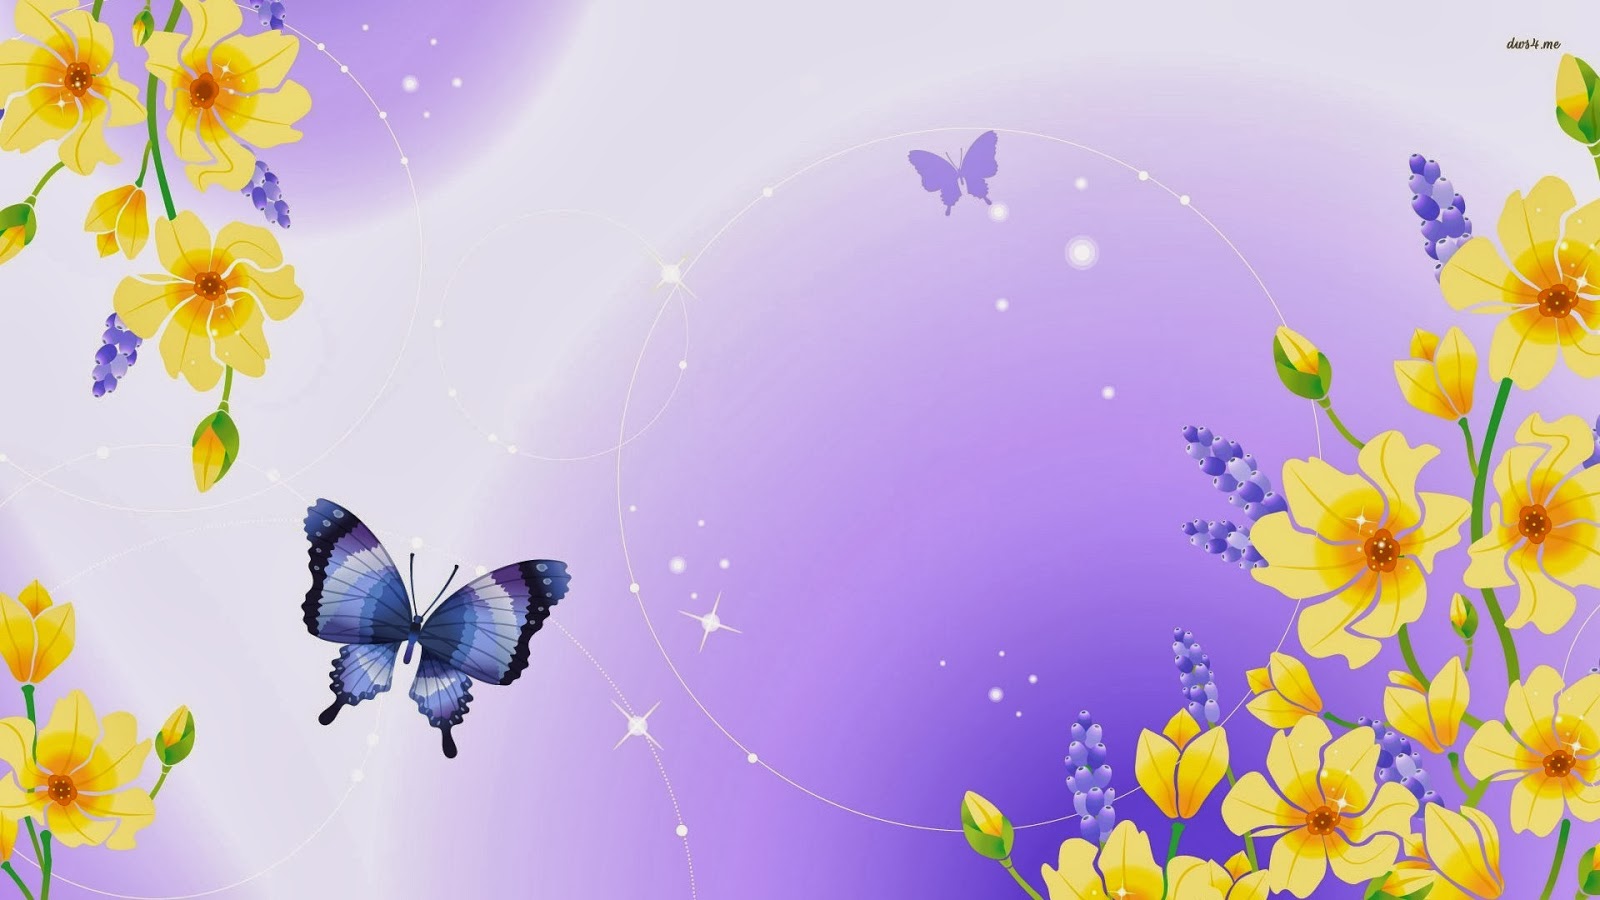 Download Cute Butterfly Images Wallpaper Click Image to Download